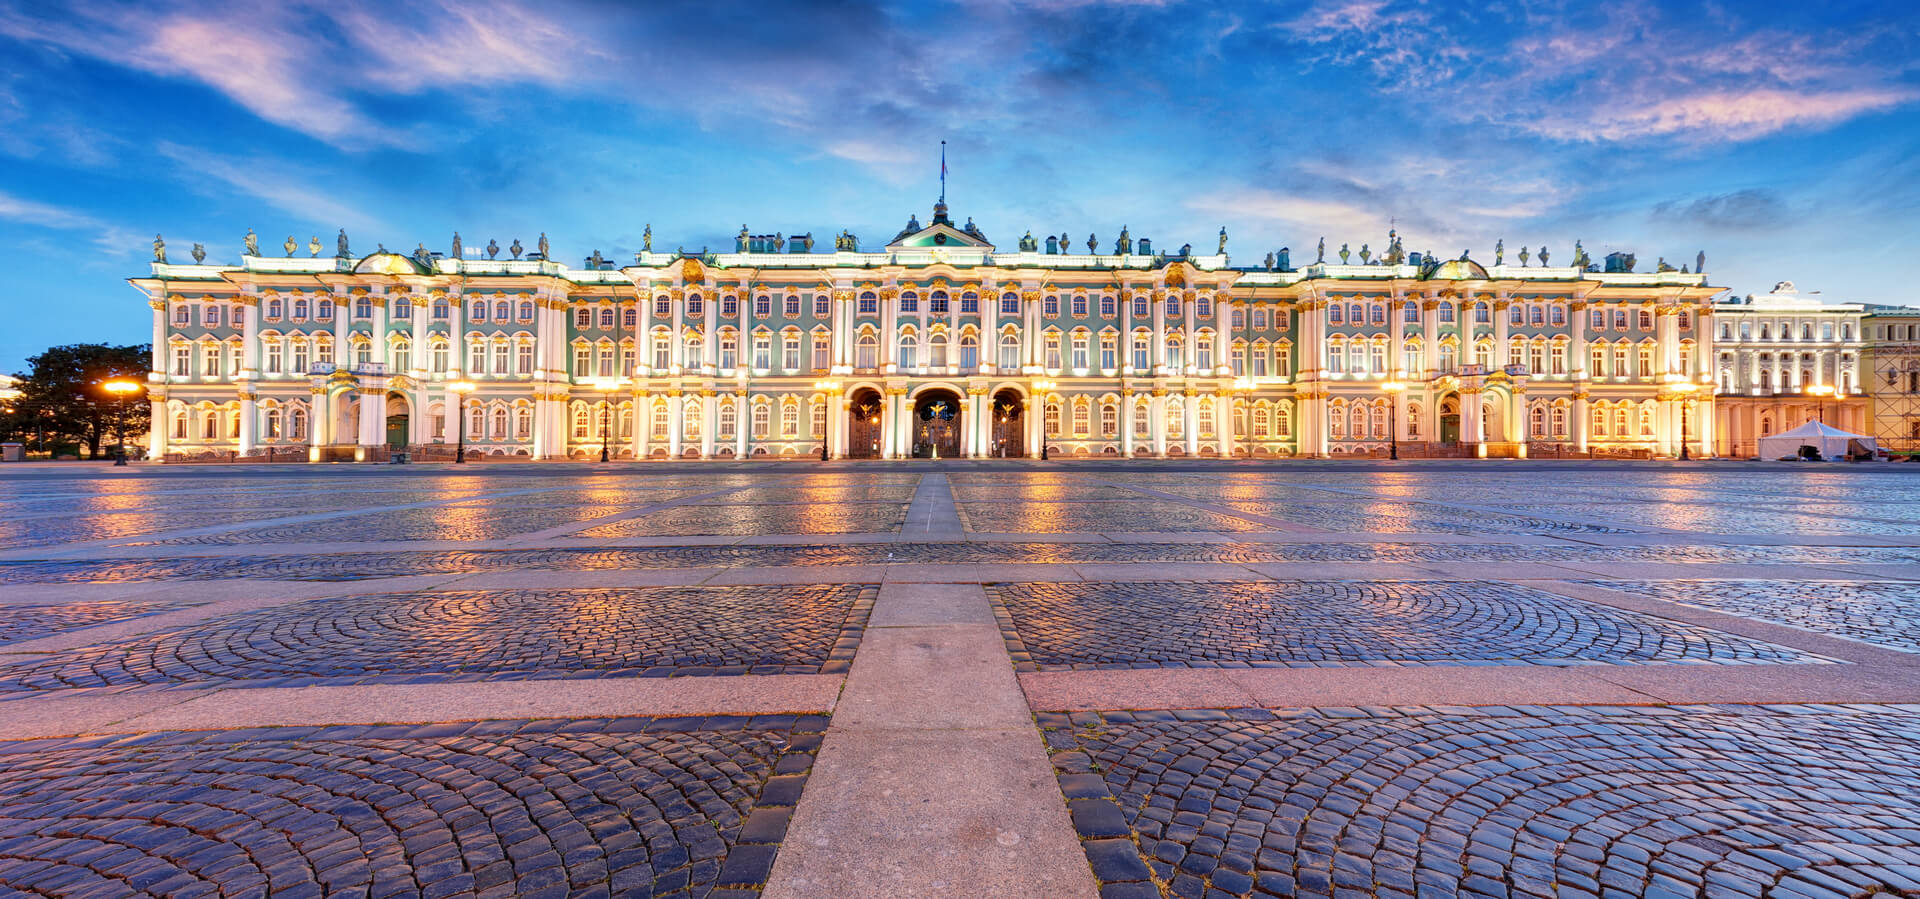 Winter Palace, house of the Hermitage Museum, iconic landmark in St. Petersburg, Russia
